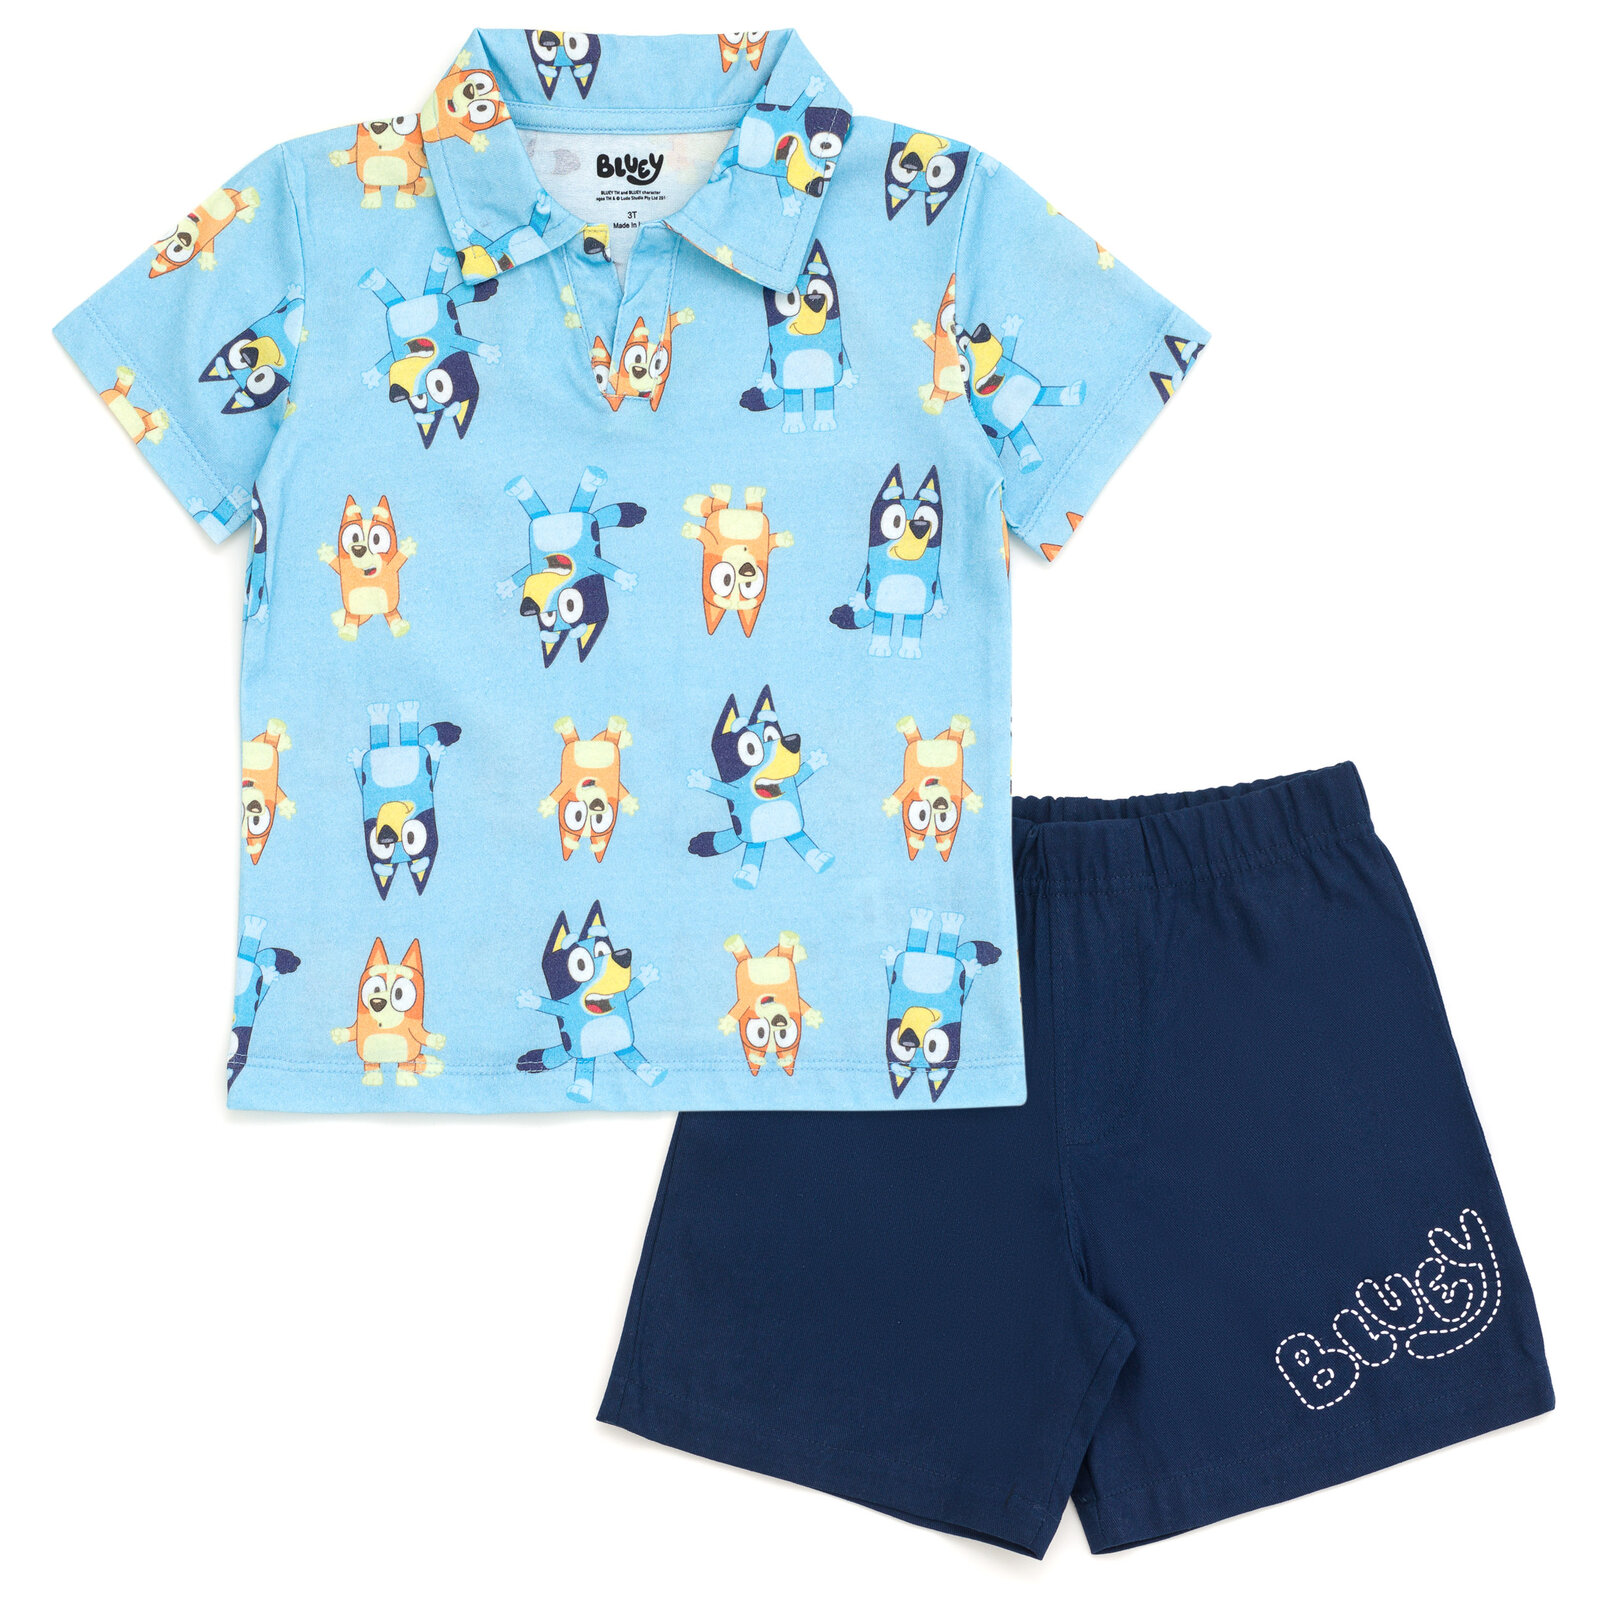 Bluey Toddler Boys Short Sleeve Polo Top and Shorts Set, 2-Piece, Sizes 2t-4t, Toddler Boy's